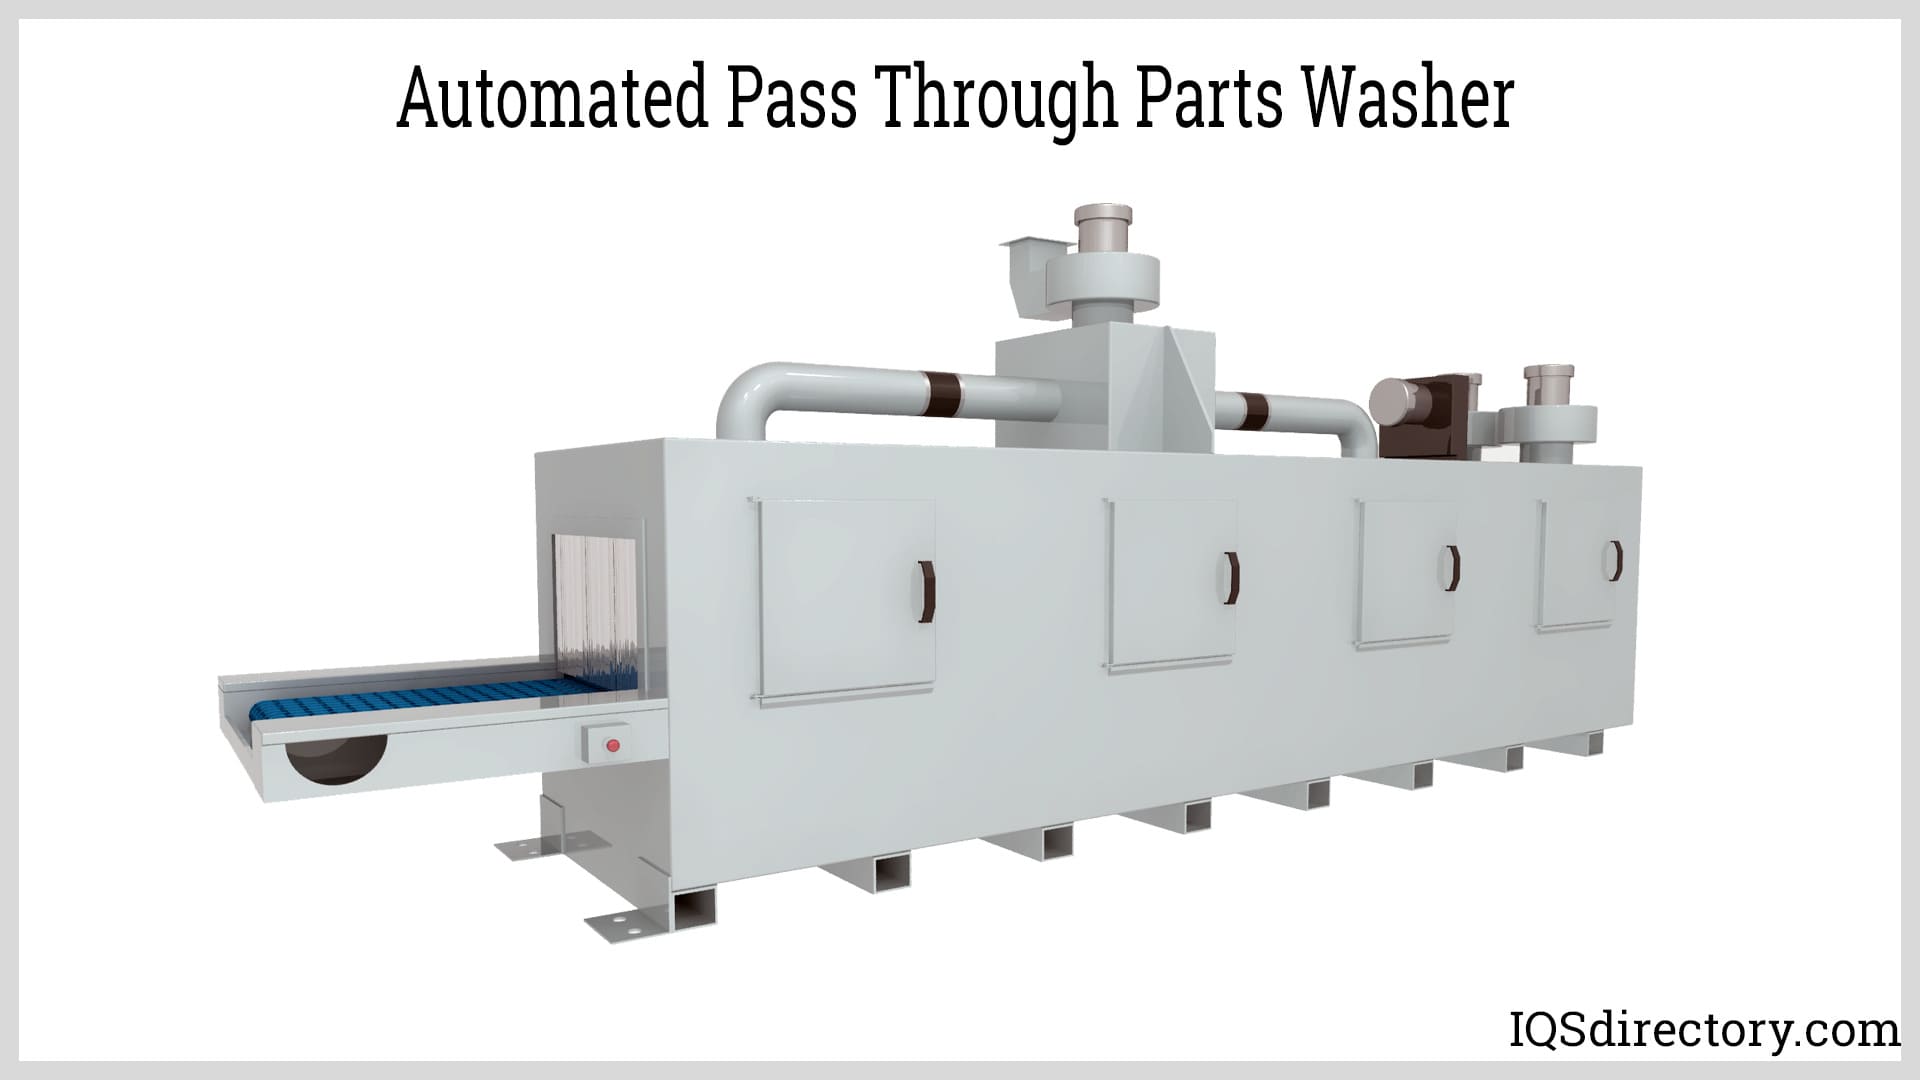 Automated Pass Through Parts Washer